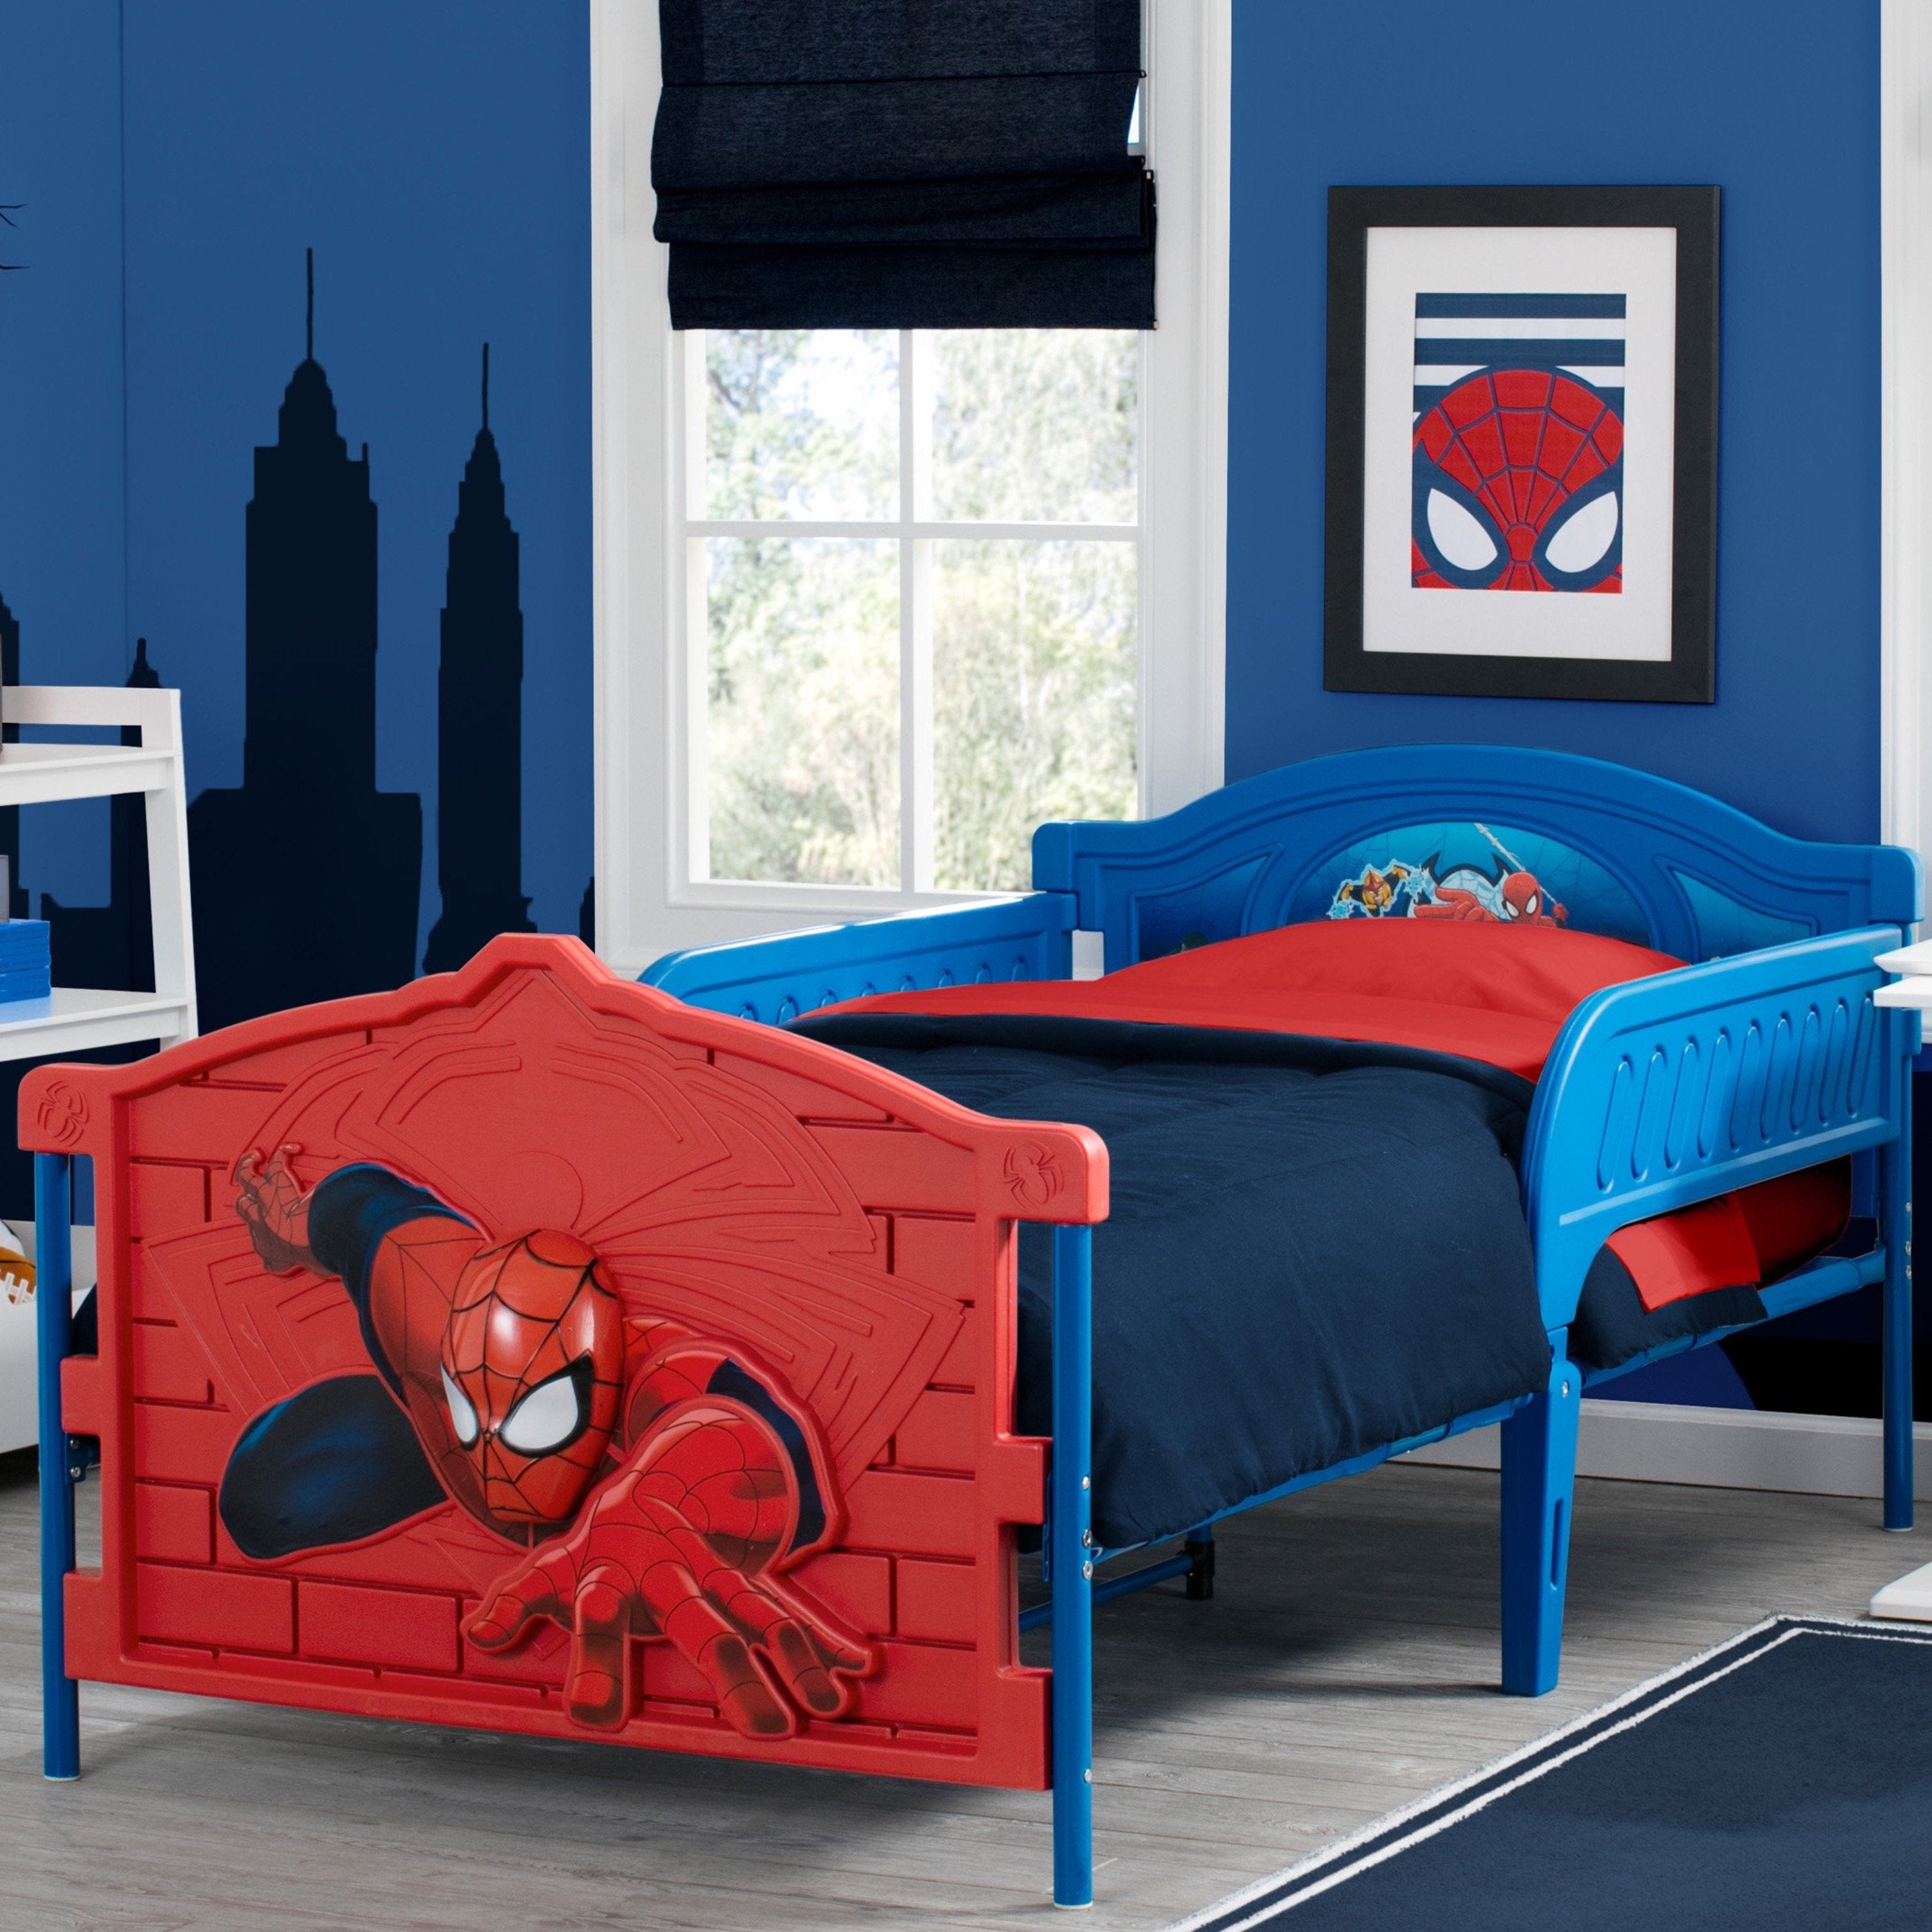 MLB Boston Red Sox Bed In Bag Set, Queen Size, Team Colors, 100